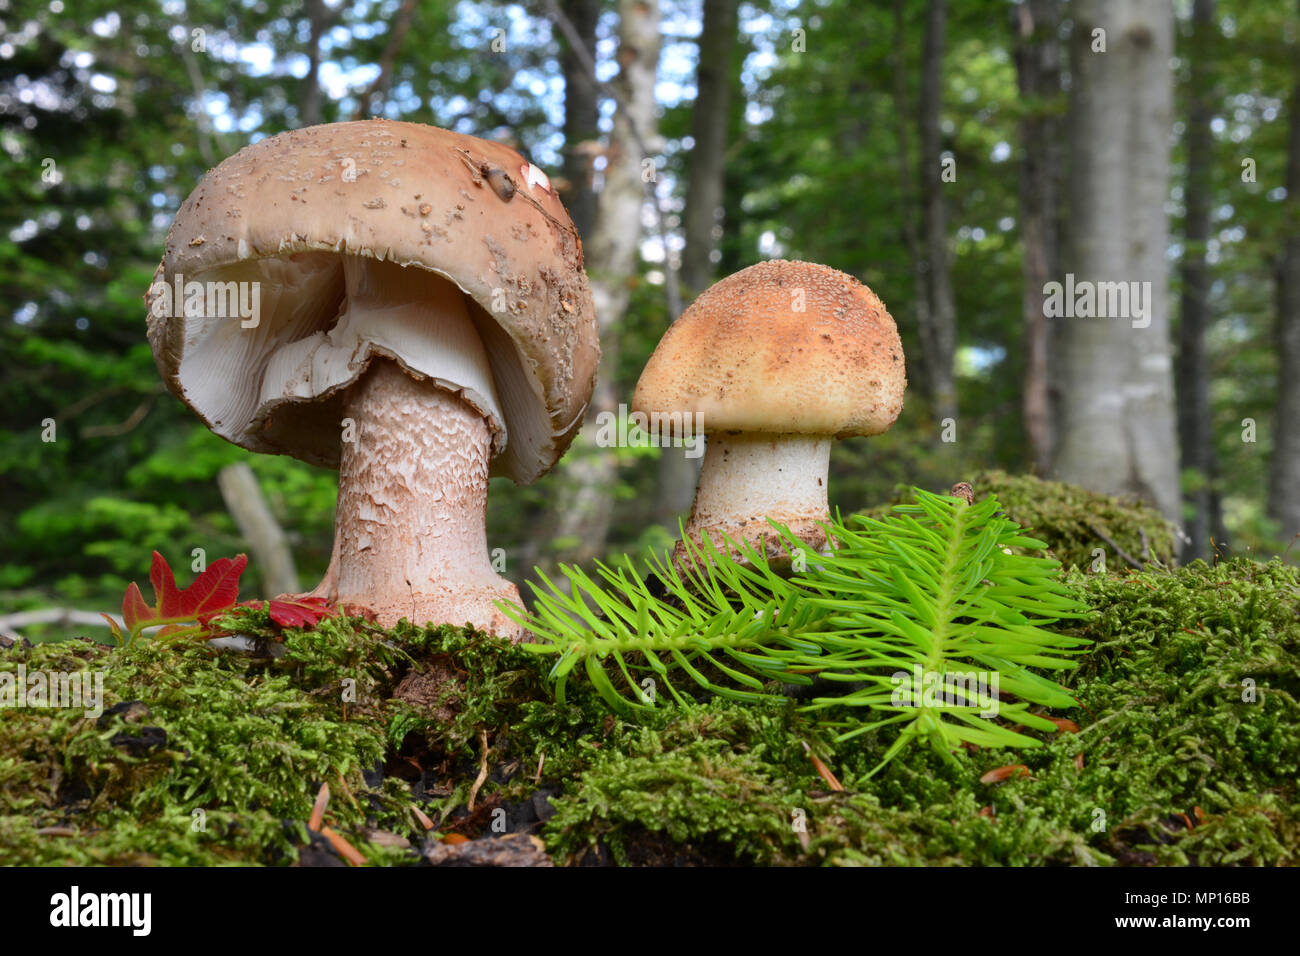 Two healthy and good looking Blusher mushrooms, or Amanita rubescens on a moss in beech forest with green fir twig and red oak leaf Stock Photo